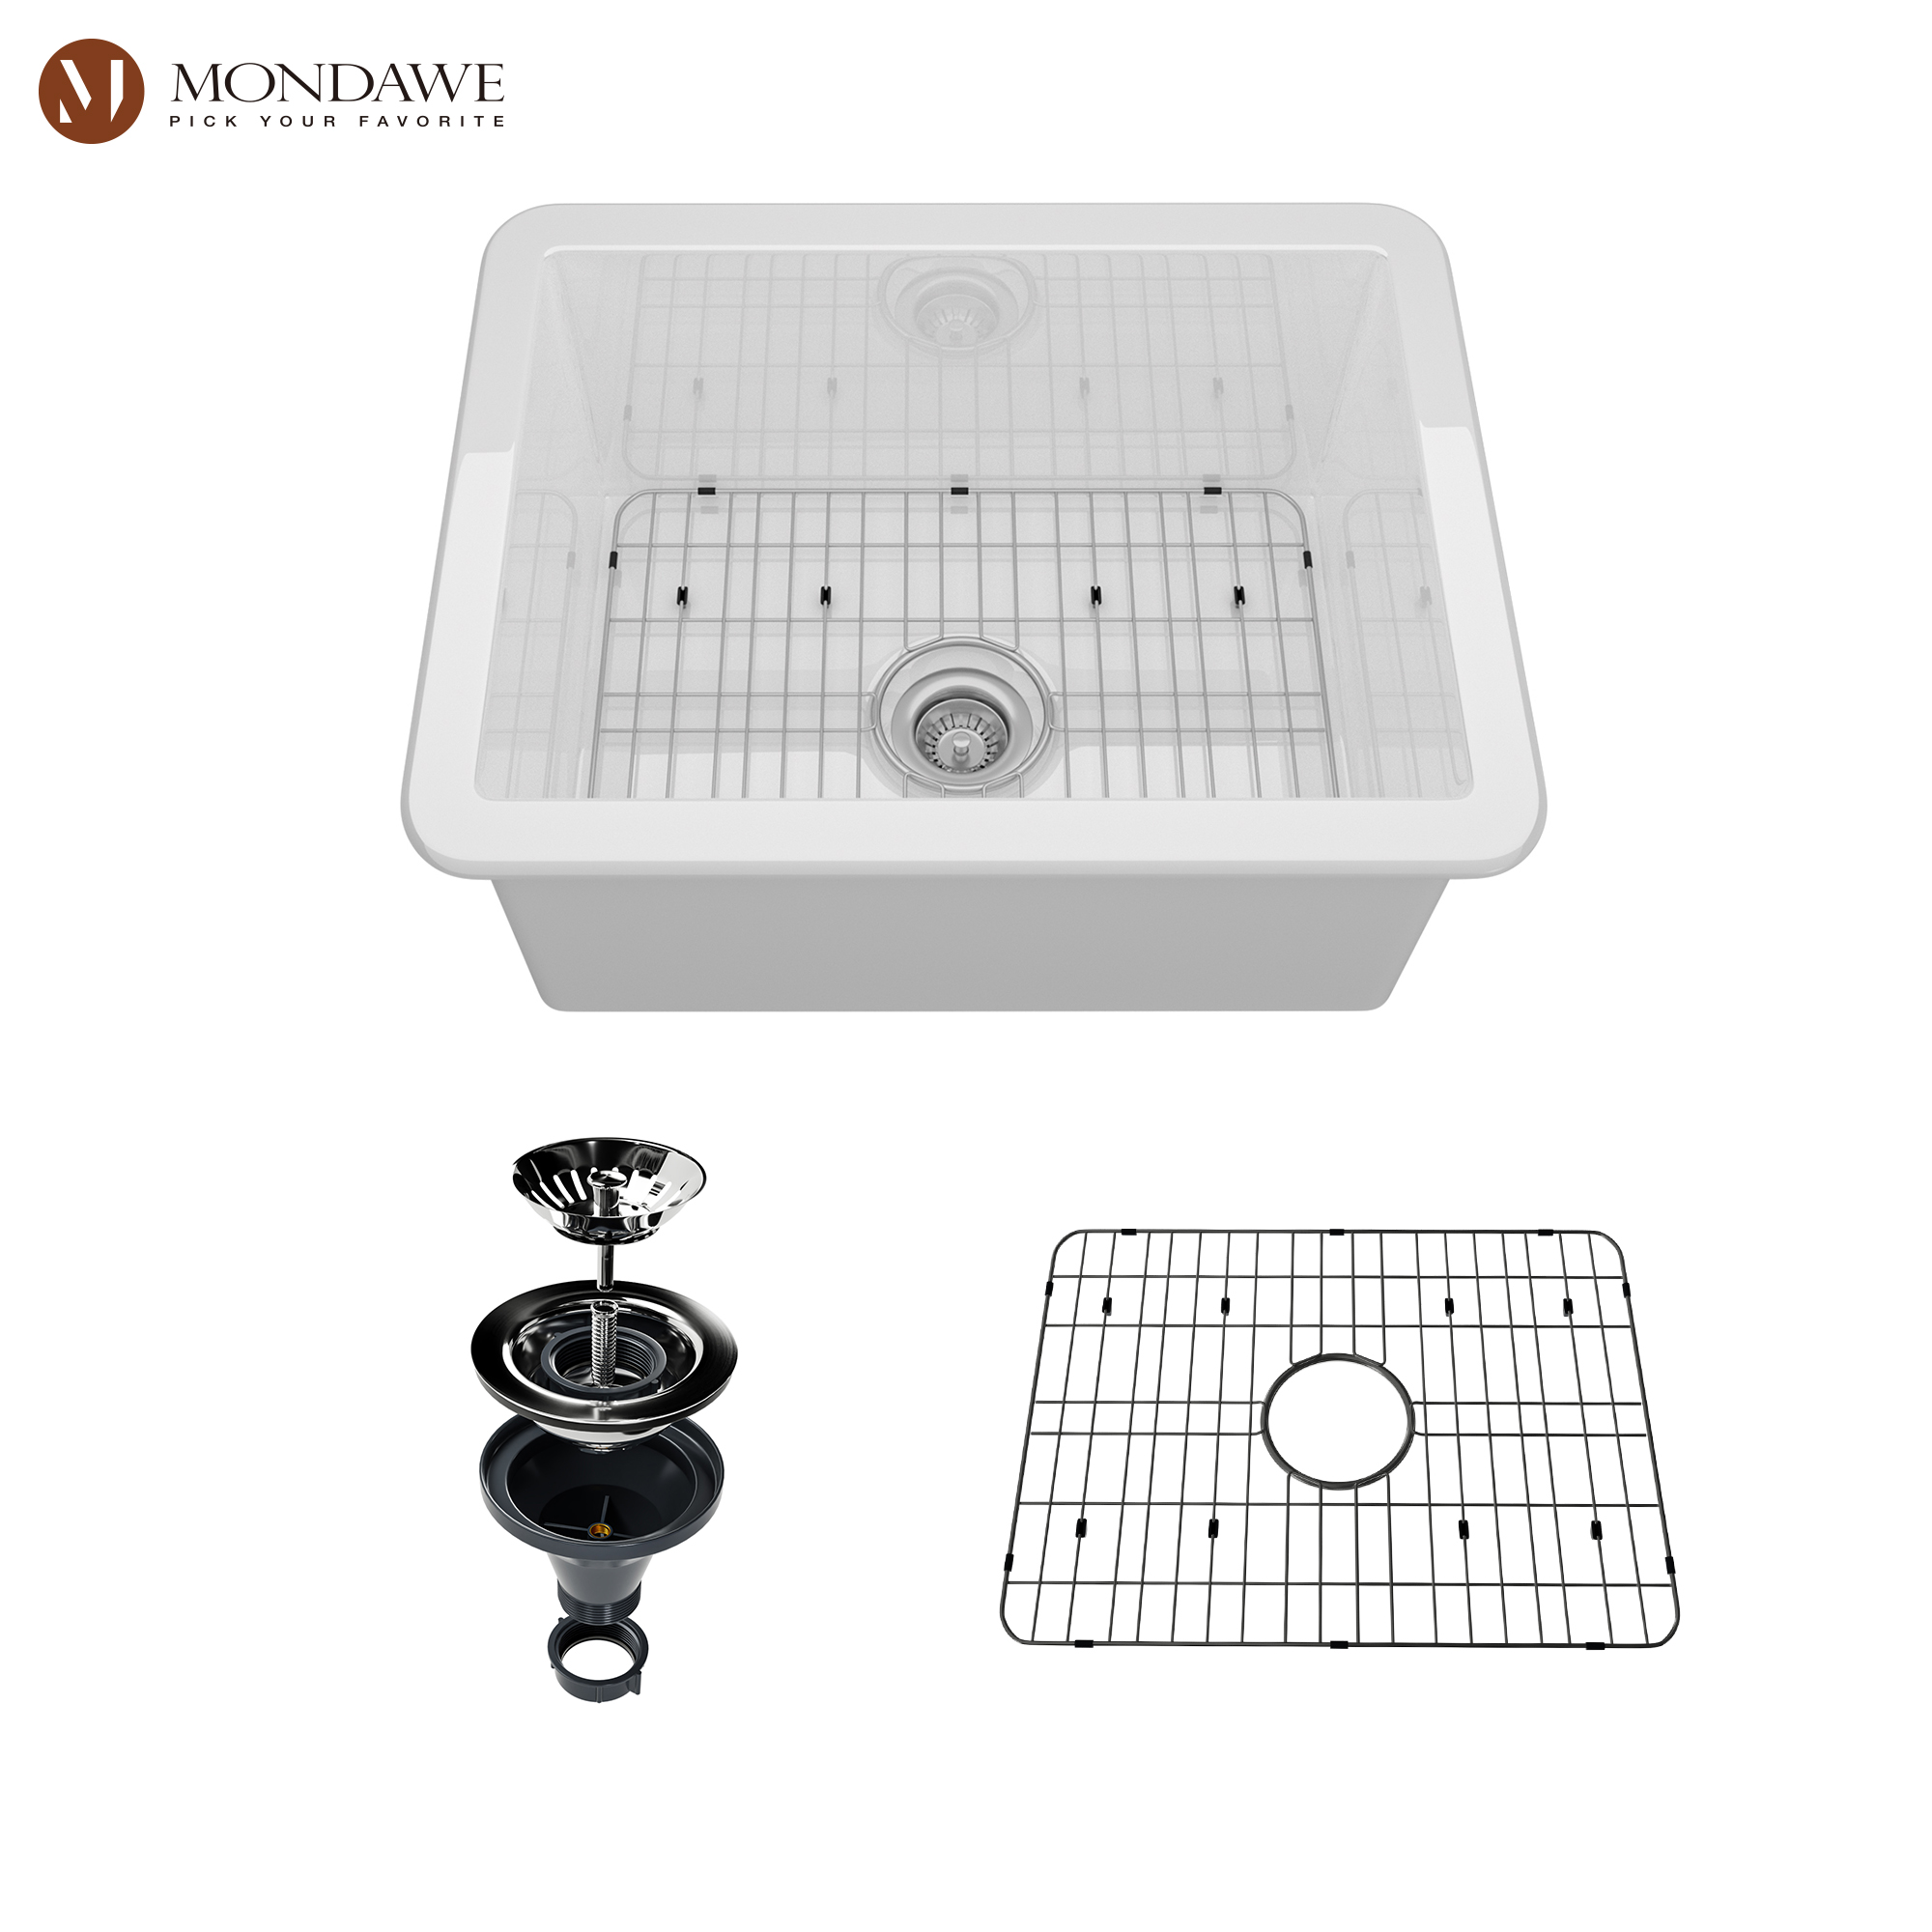 Undermount 24 in. single bowl fireclay kitchen sink in white comes with stainless steel bottom grid and strainer-Mondawe